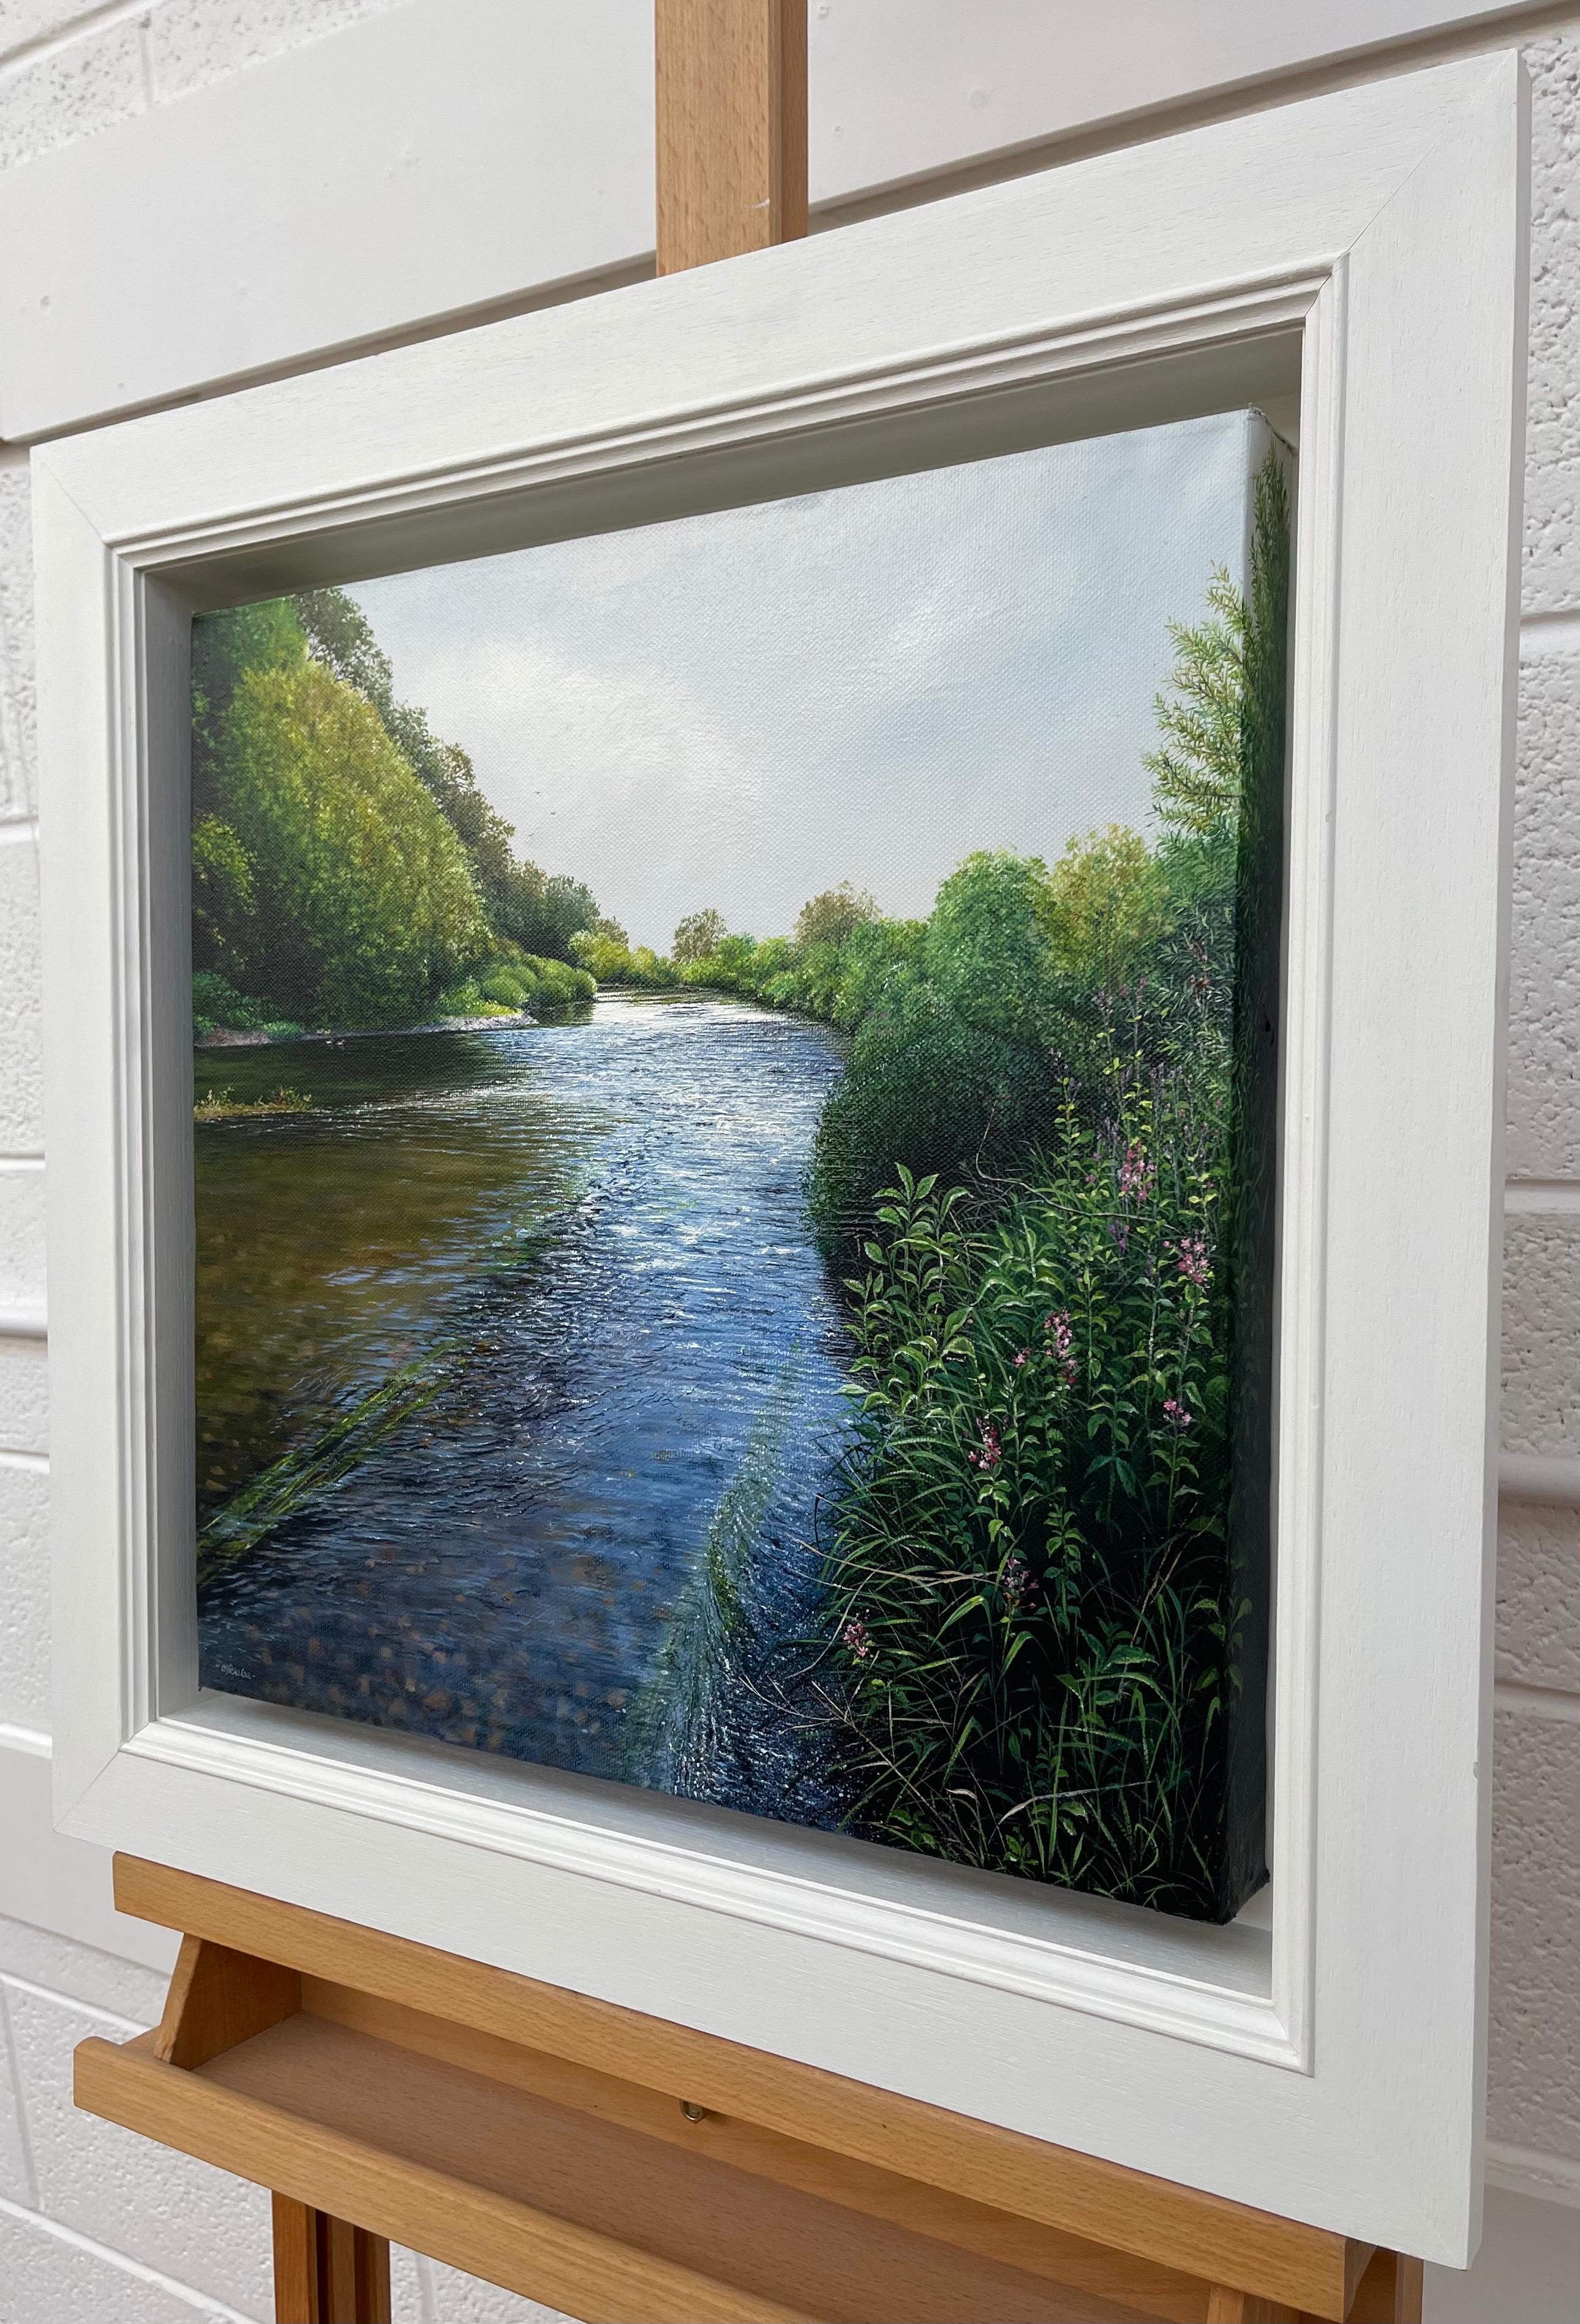 Light Reflections on the River Landscape Painting by British Photorealist Artist, Nicholas Smith. 

Art measures 16 x 16 inches
Frame measures 21 x 21 inches  

Nicholas Smith was born in 1960, and is the son of one of Britain’s foremost landscape